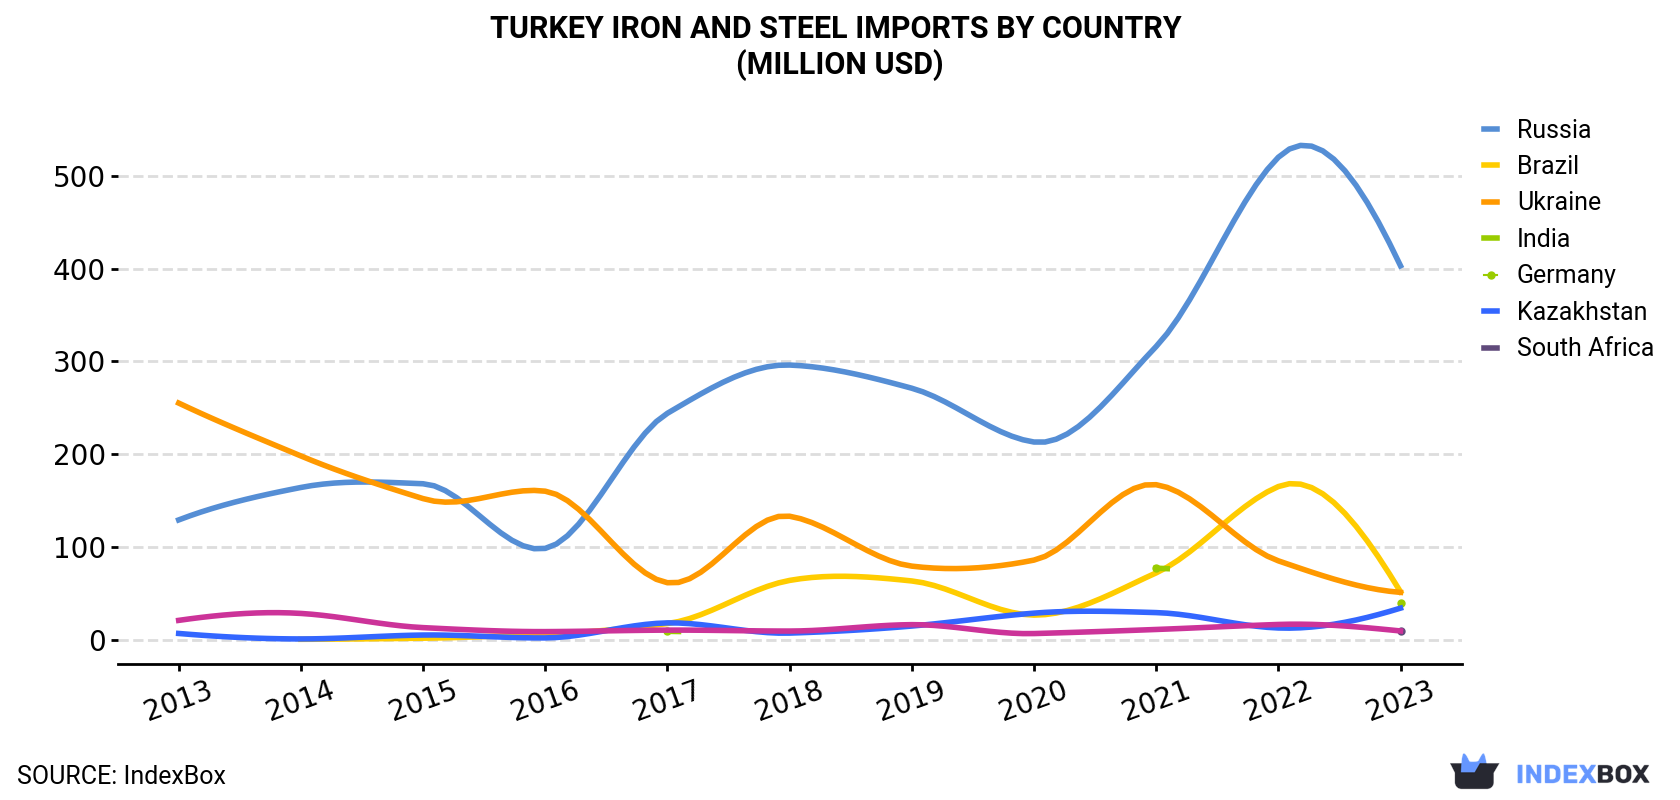 Turkey Iron and Steel Imports By Country (Million USD)